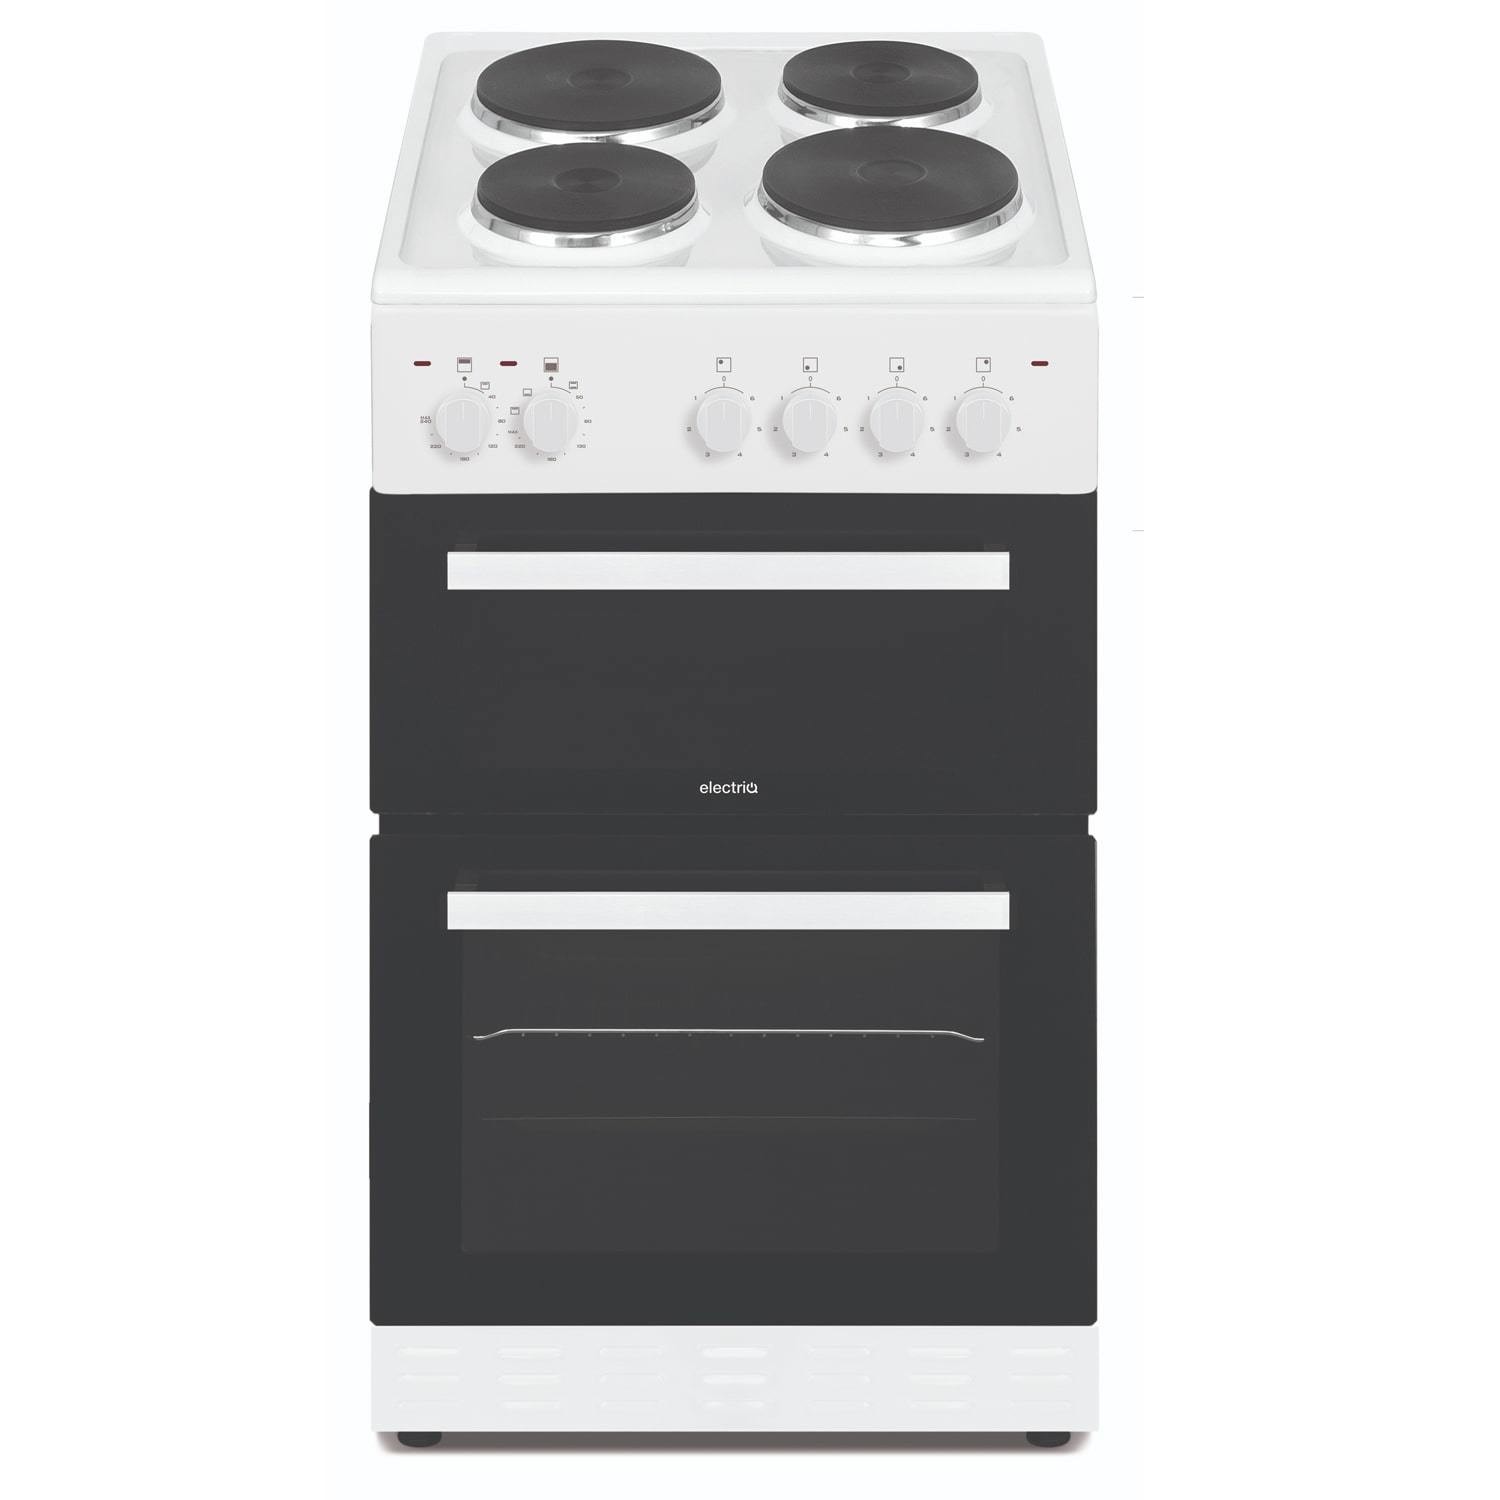 electriQ 50cm Double Cavity Electric Cooker with Sealed Plate Hob - White